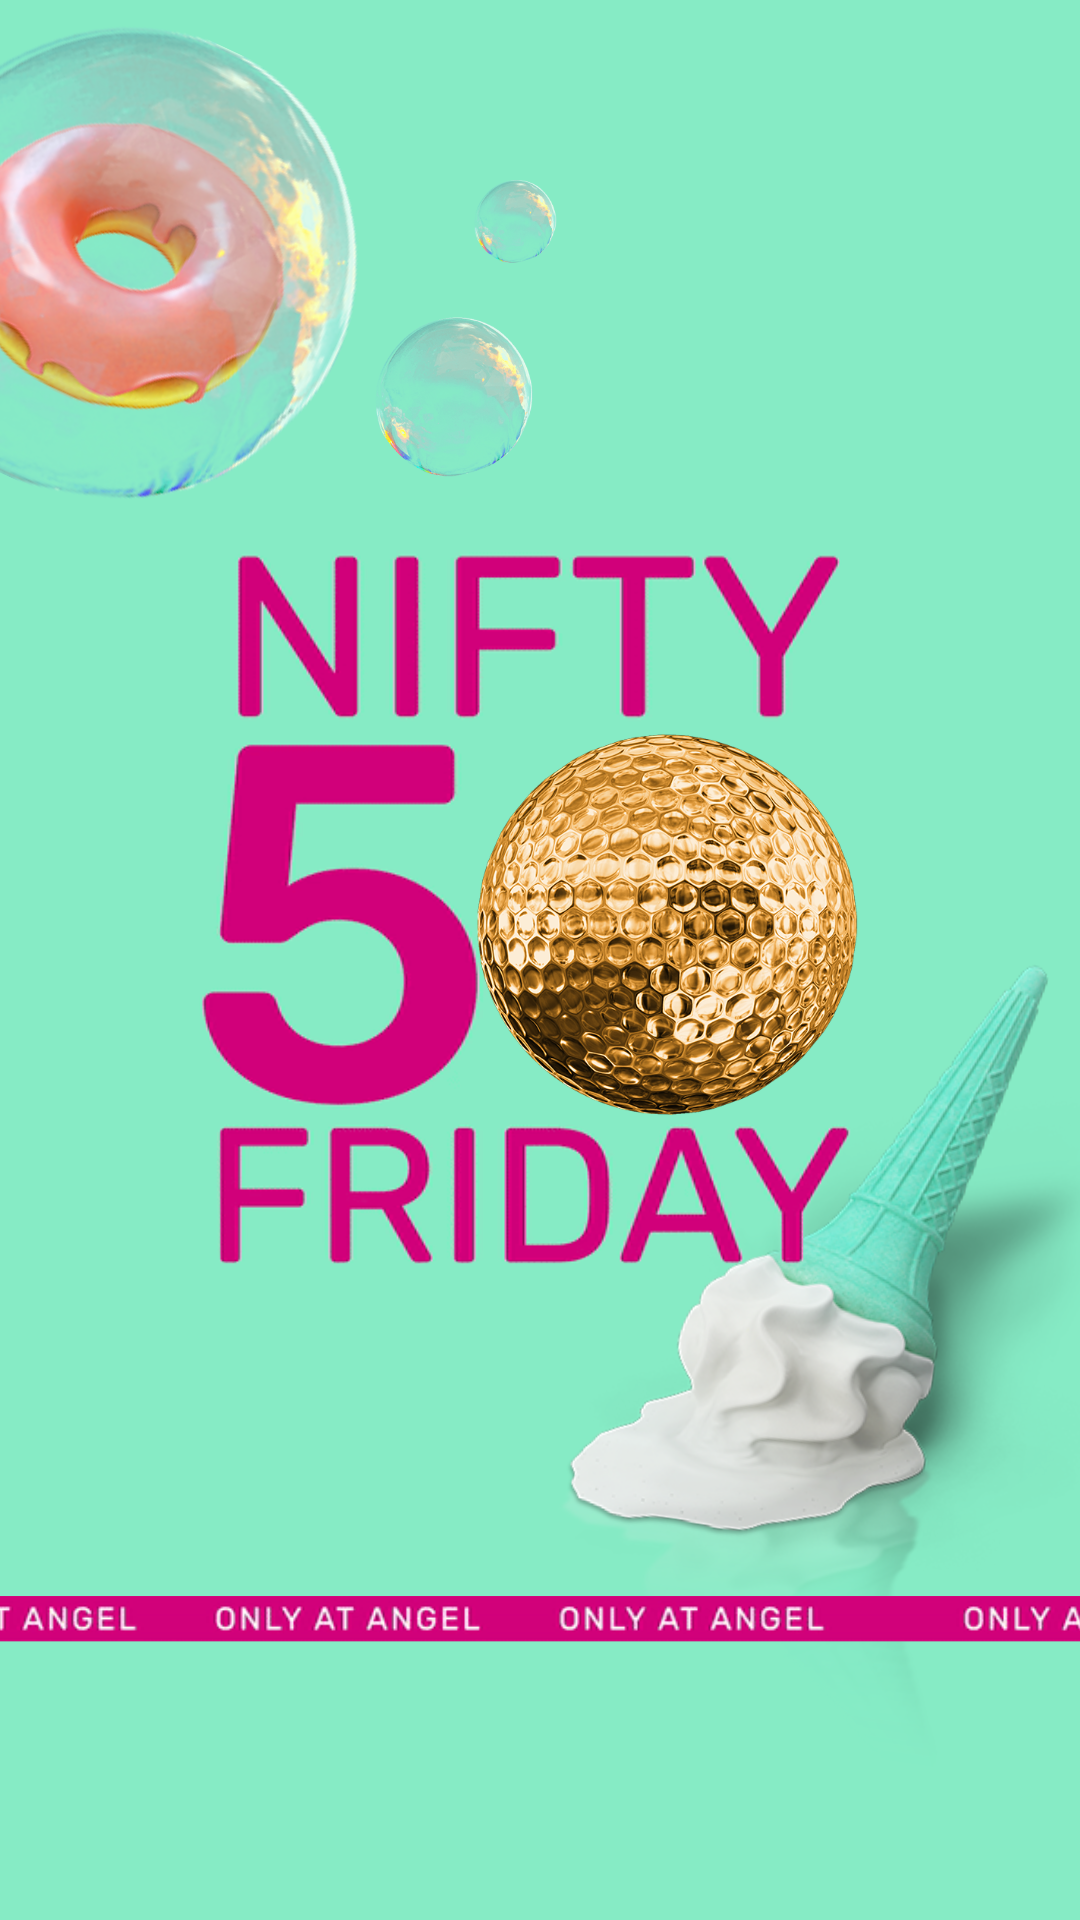 Nifty 50 Fridays at Birdies crazy golf - half price golf on all standard adult tickets every Friday until May 31. 